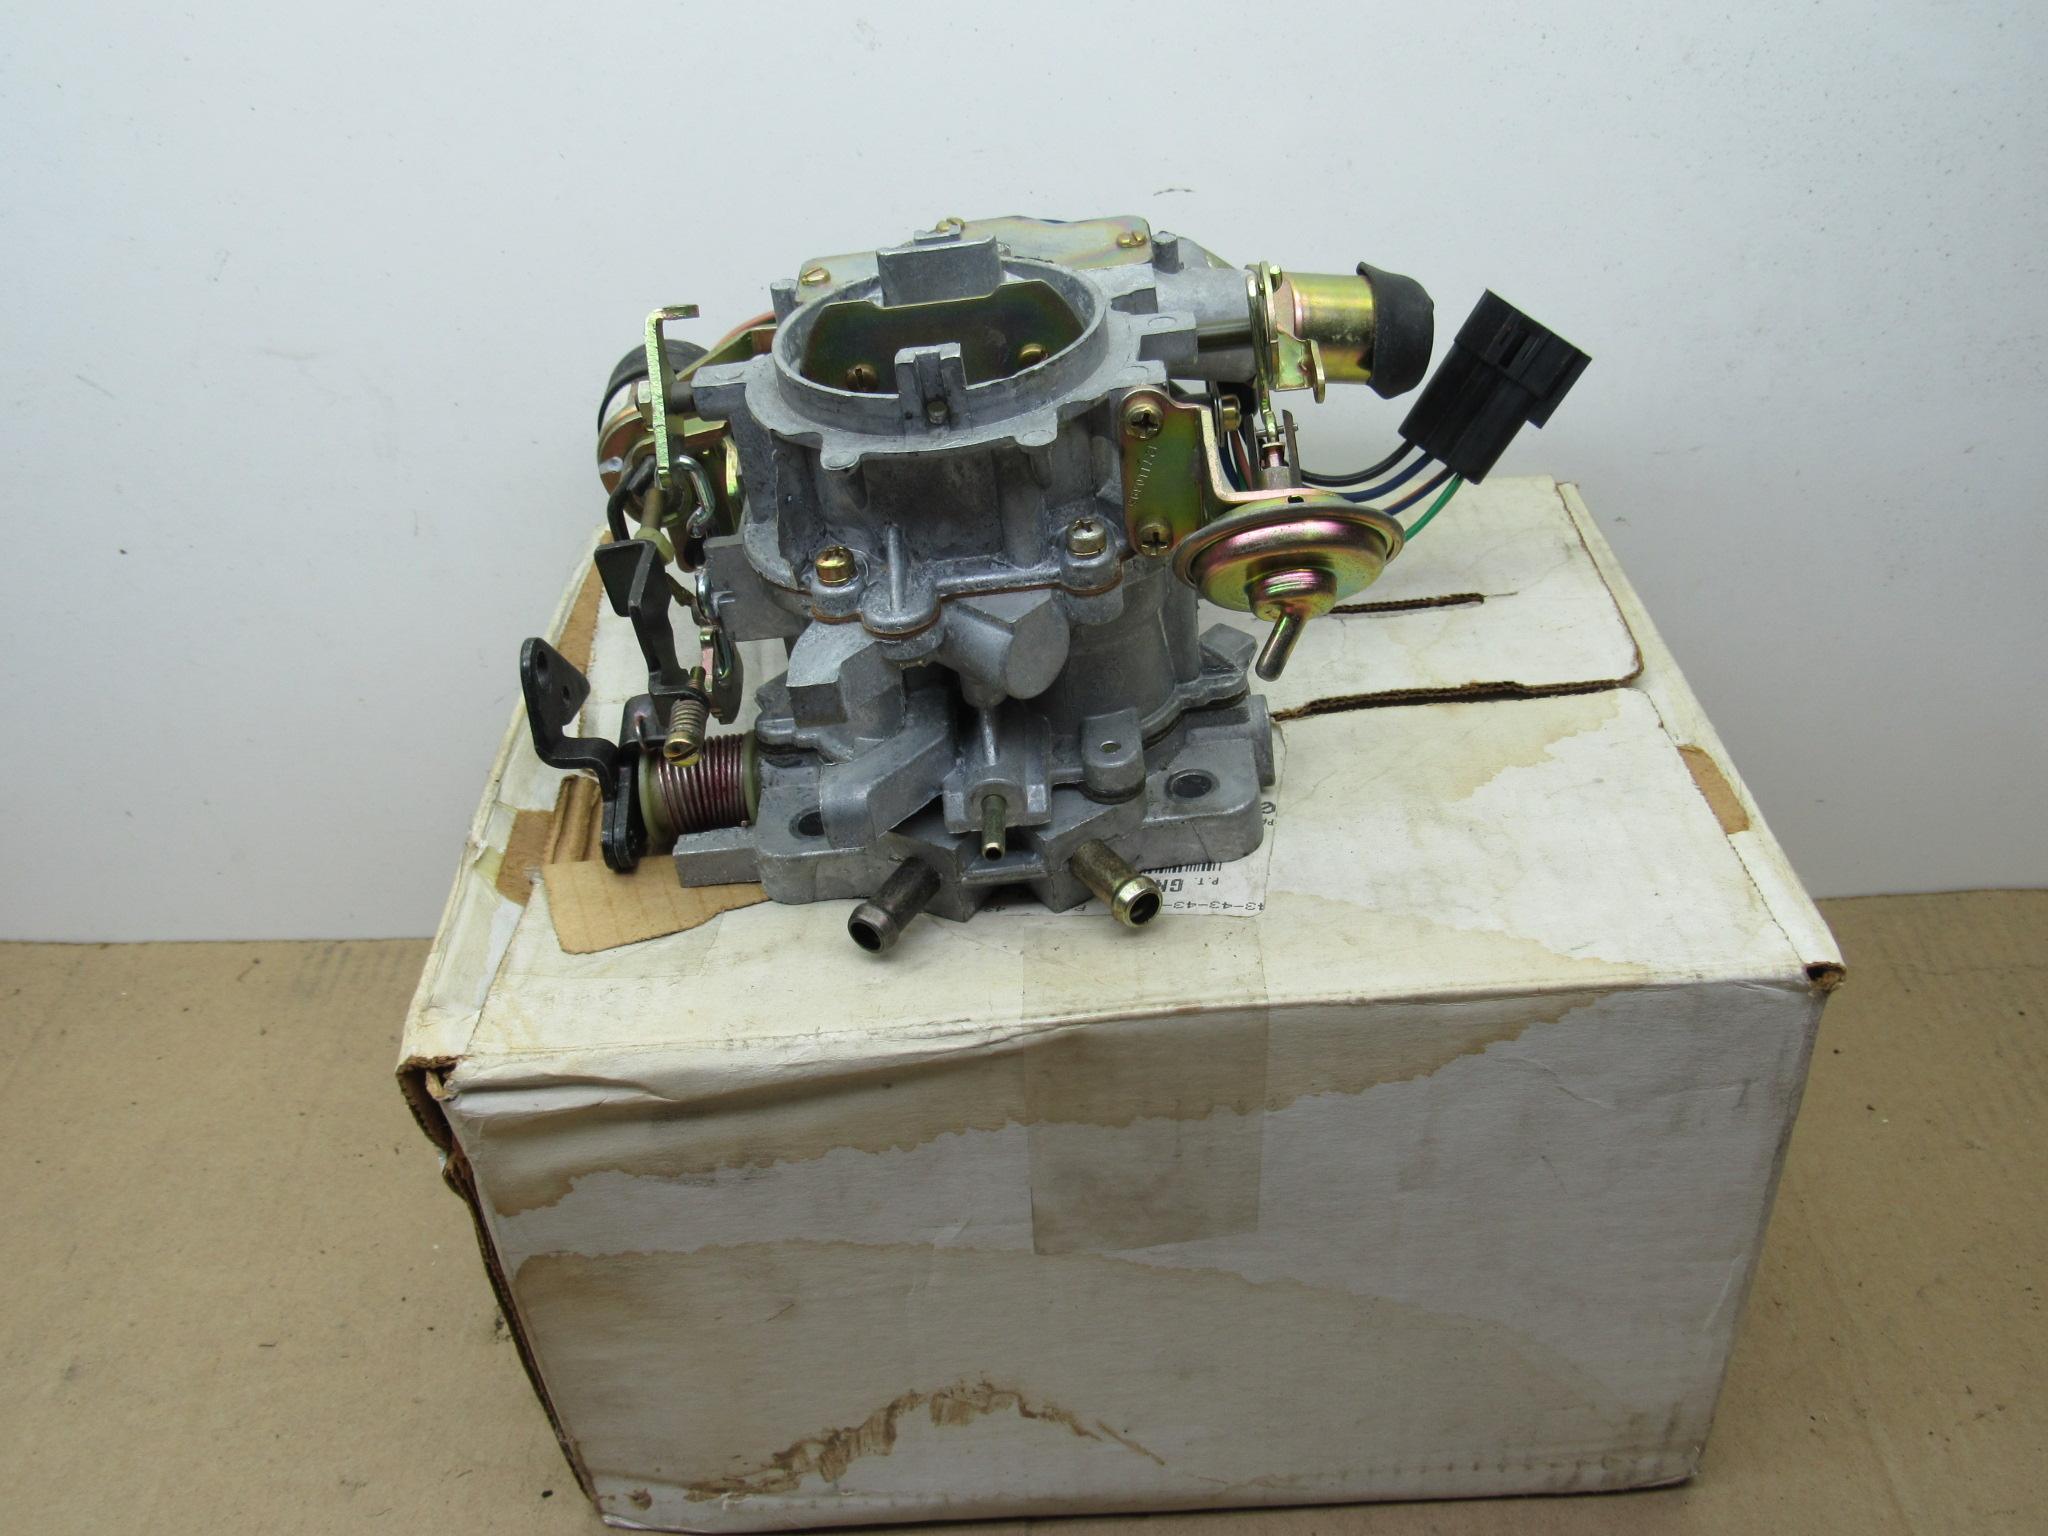 Carburetor - Holley# 4324647 - R40276 - 318 2 BBL - M - Body - 1986-89 -  NOS - SHIPS FREE TO LOWER 48